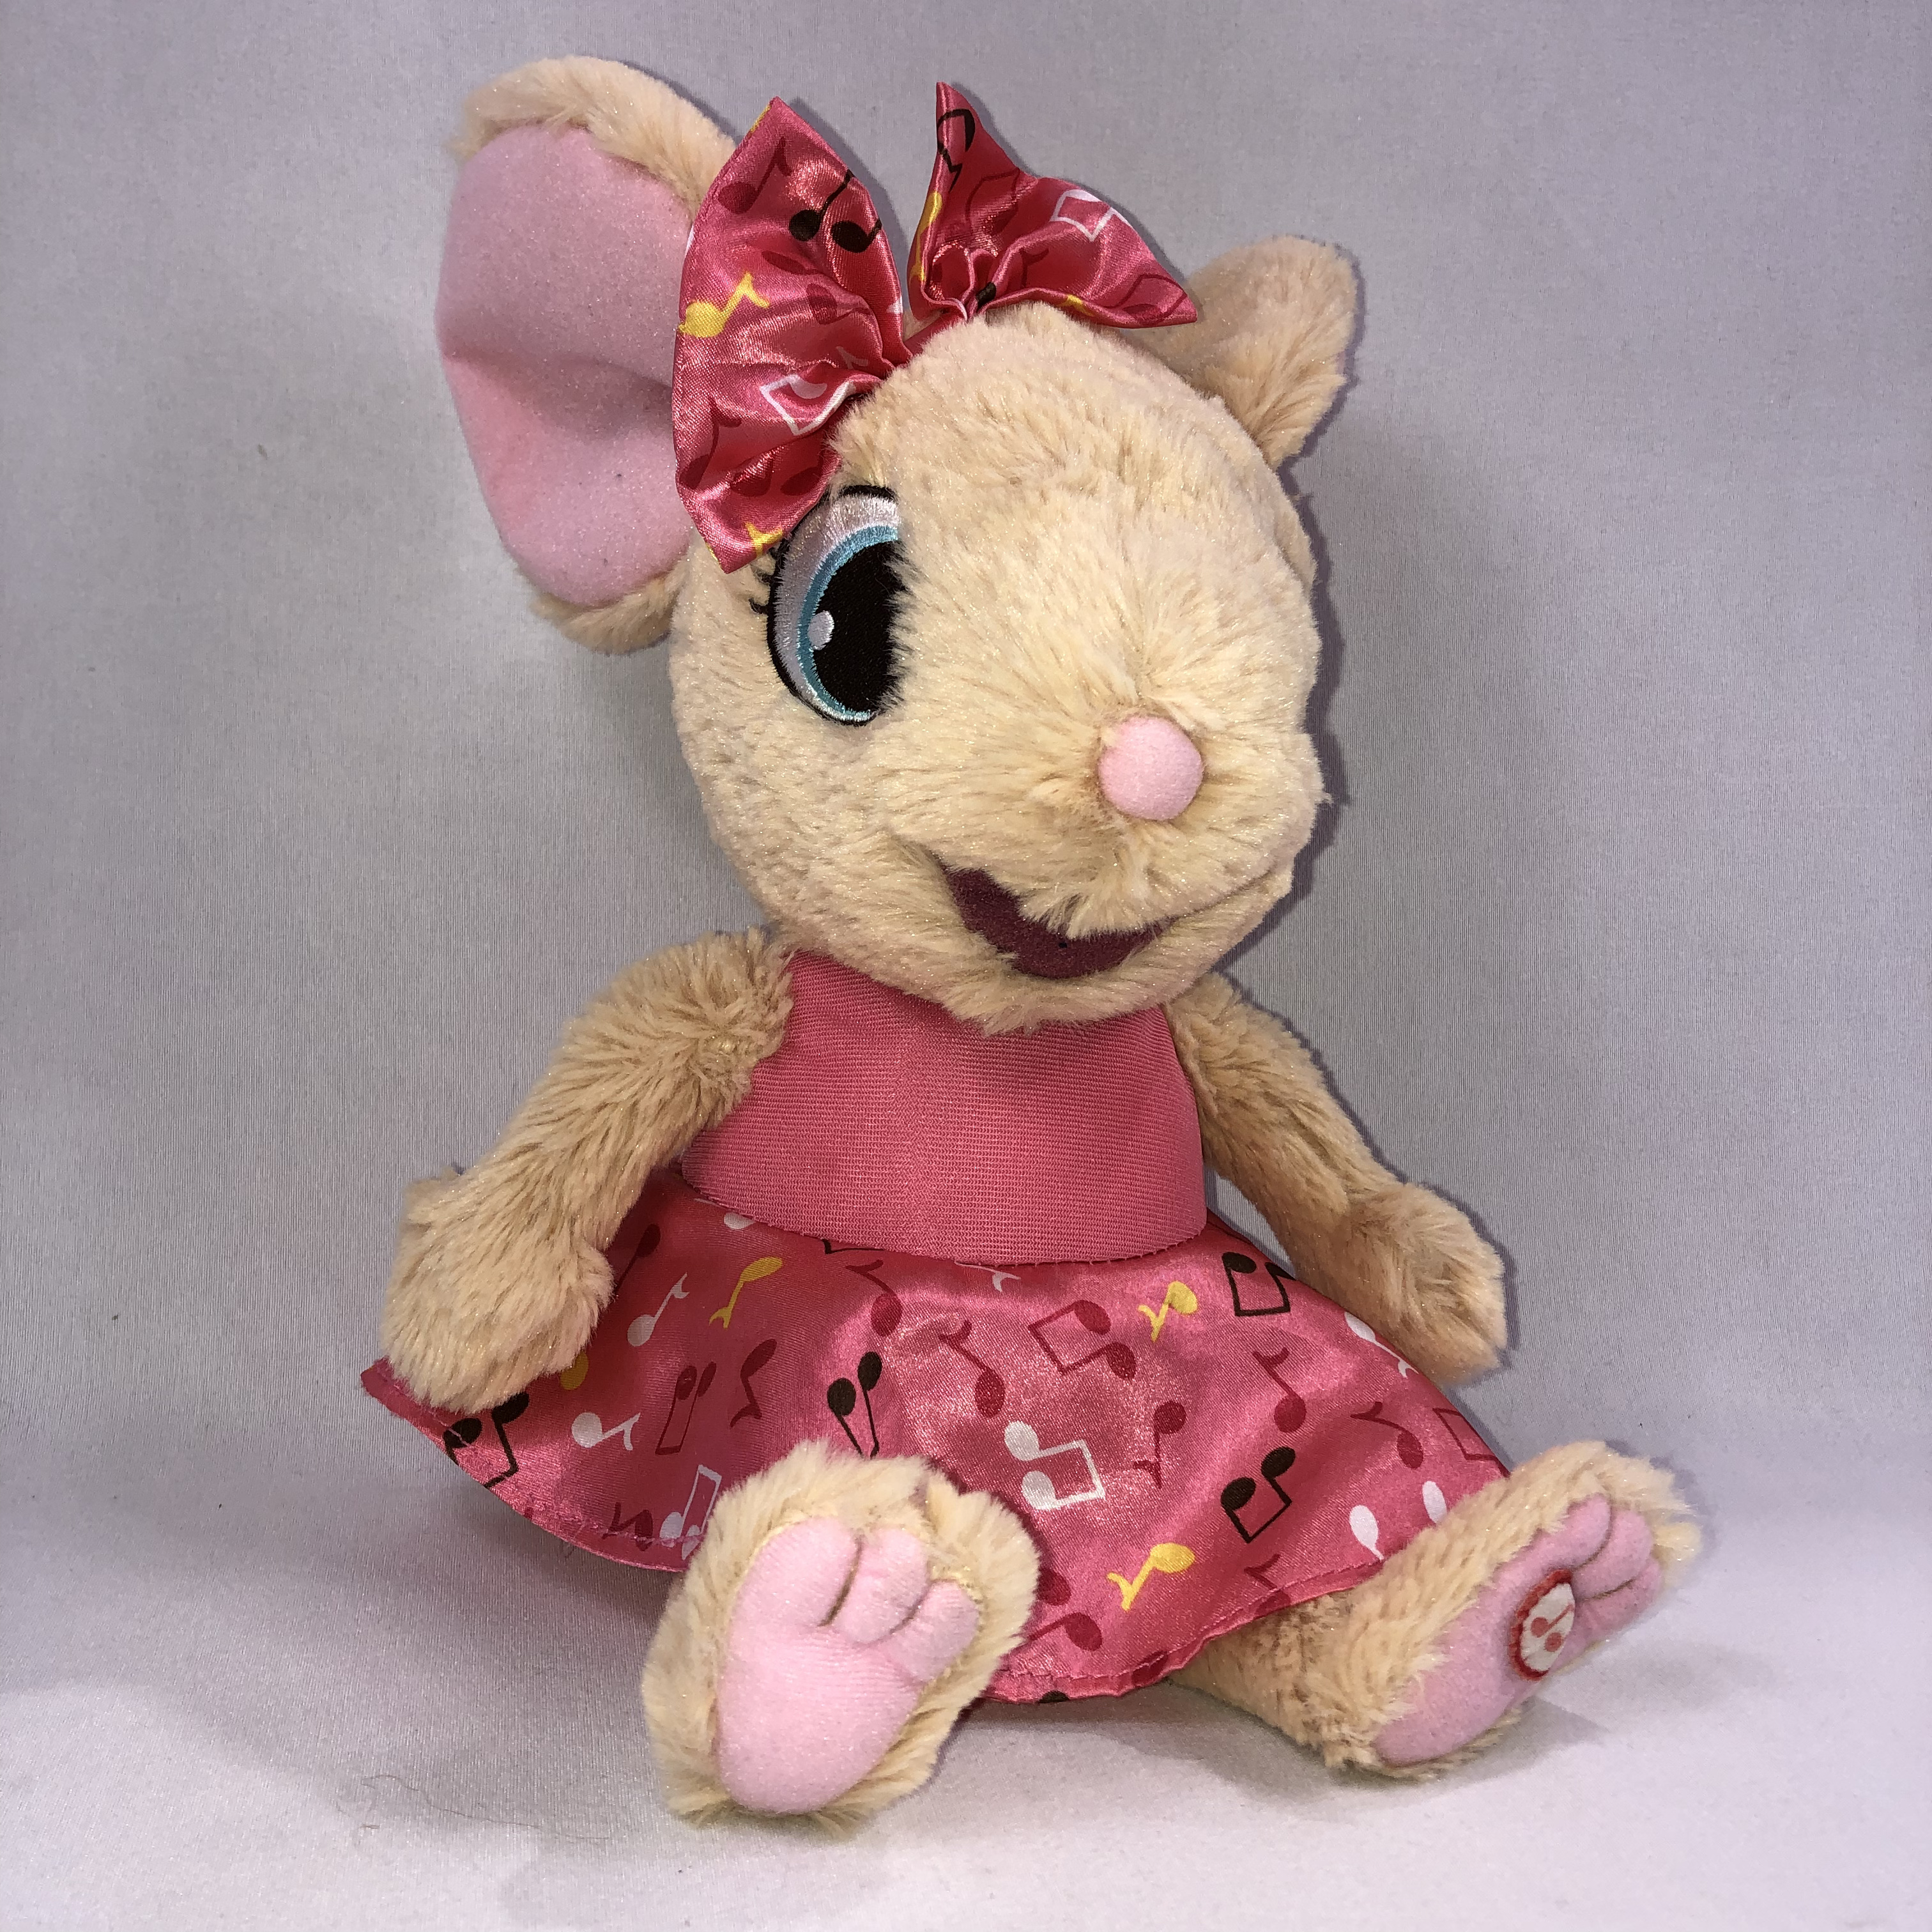 Request A Song Mimi 14" Plush Electronic Toy by Hallmark C8